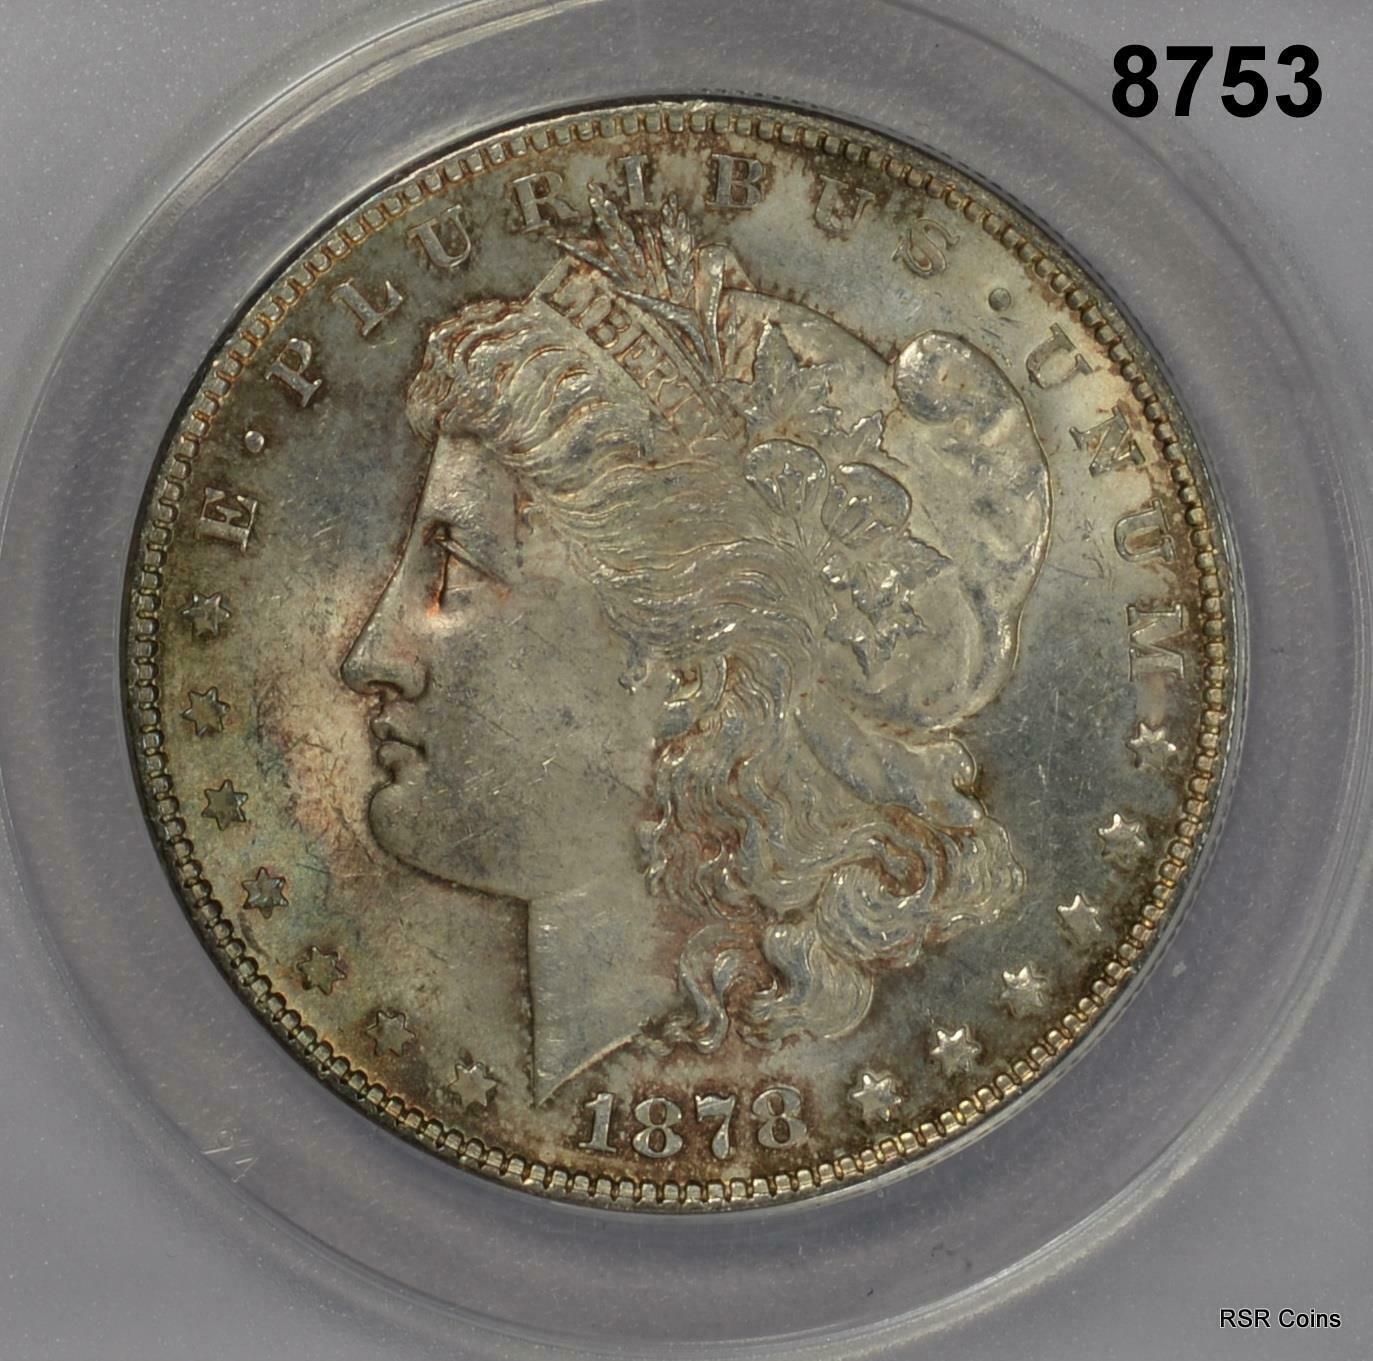 1878 7TF MORGAN SILVER DOLLAR ANACS CERTIFIED MS62 GOLD-BLUE COLOR! #8753